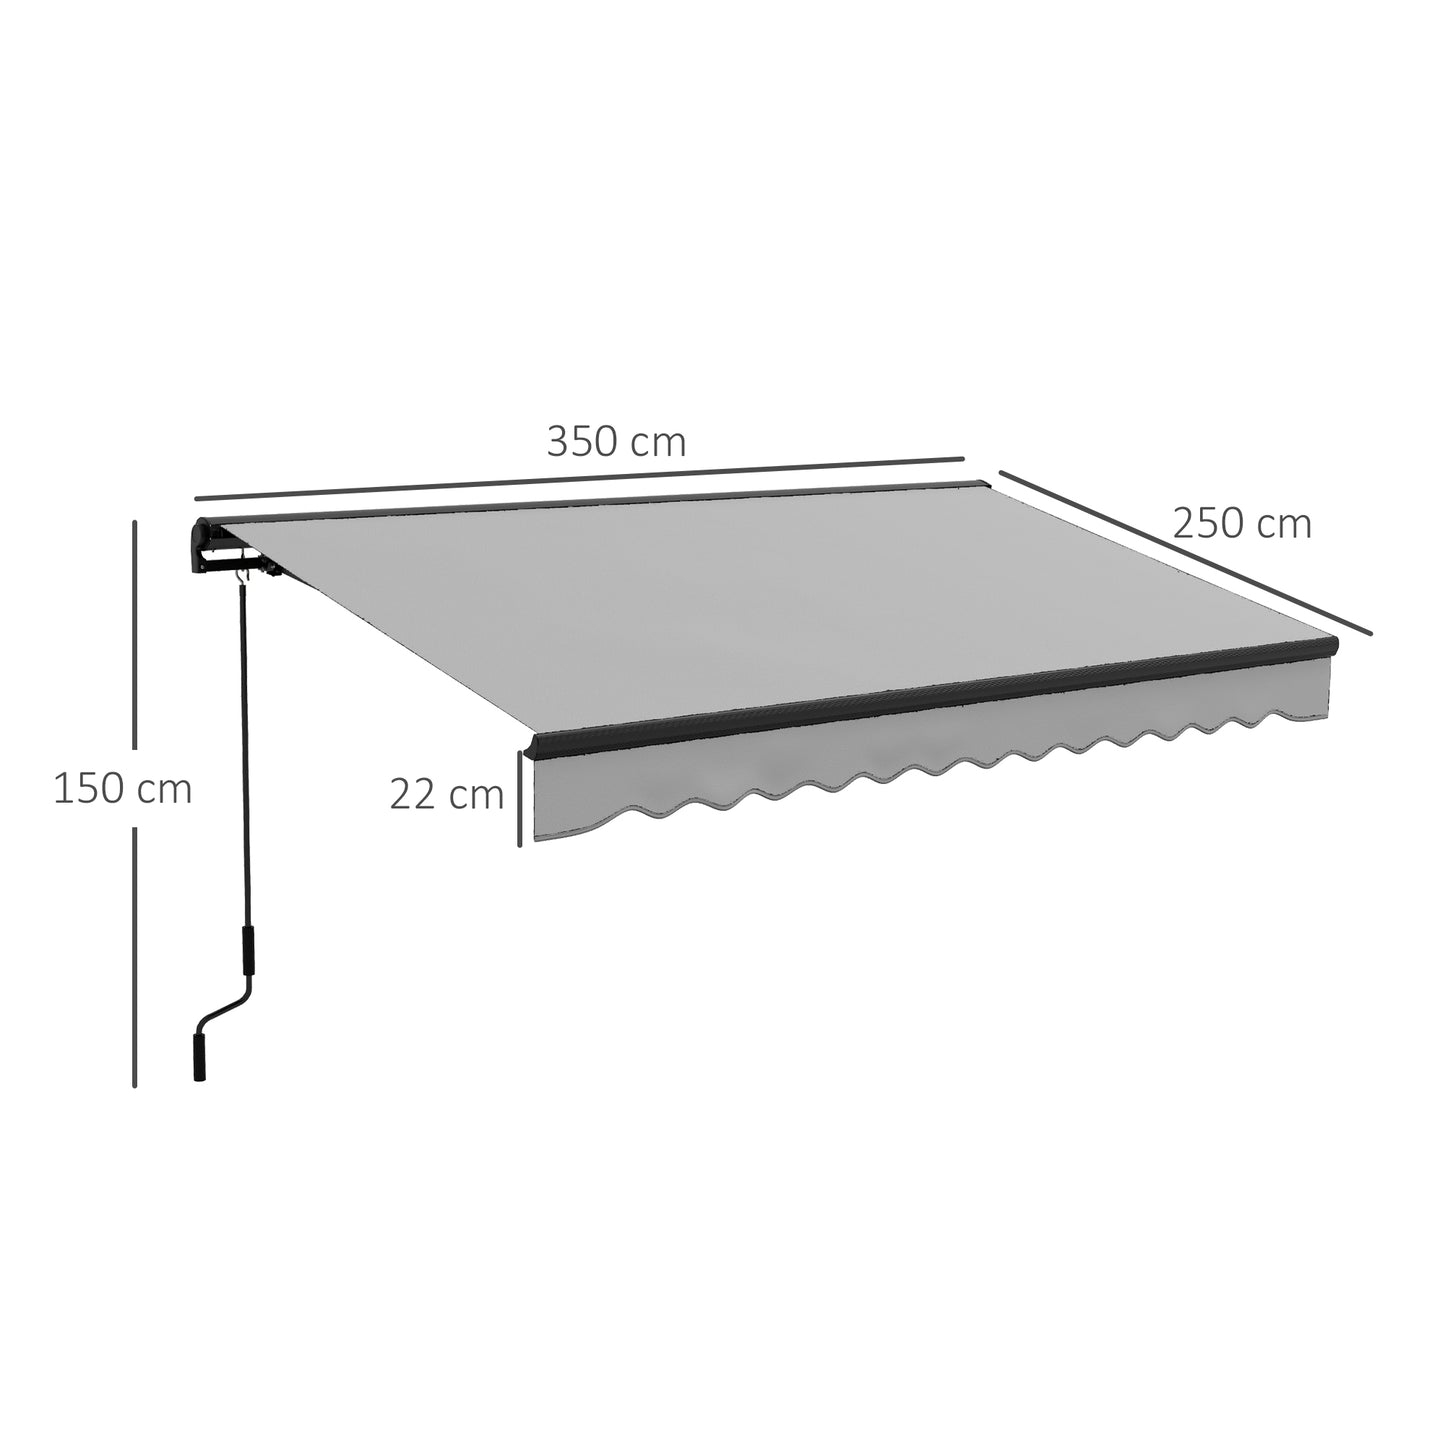 Outsunny 3.5 x 2.5m Aluminium Frame Electric Awning, Retractable Awning Sun Canopies for Patio Door Window, Light Grey